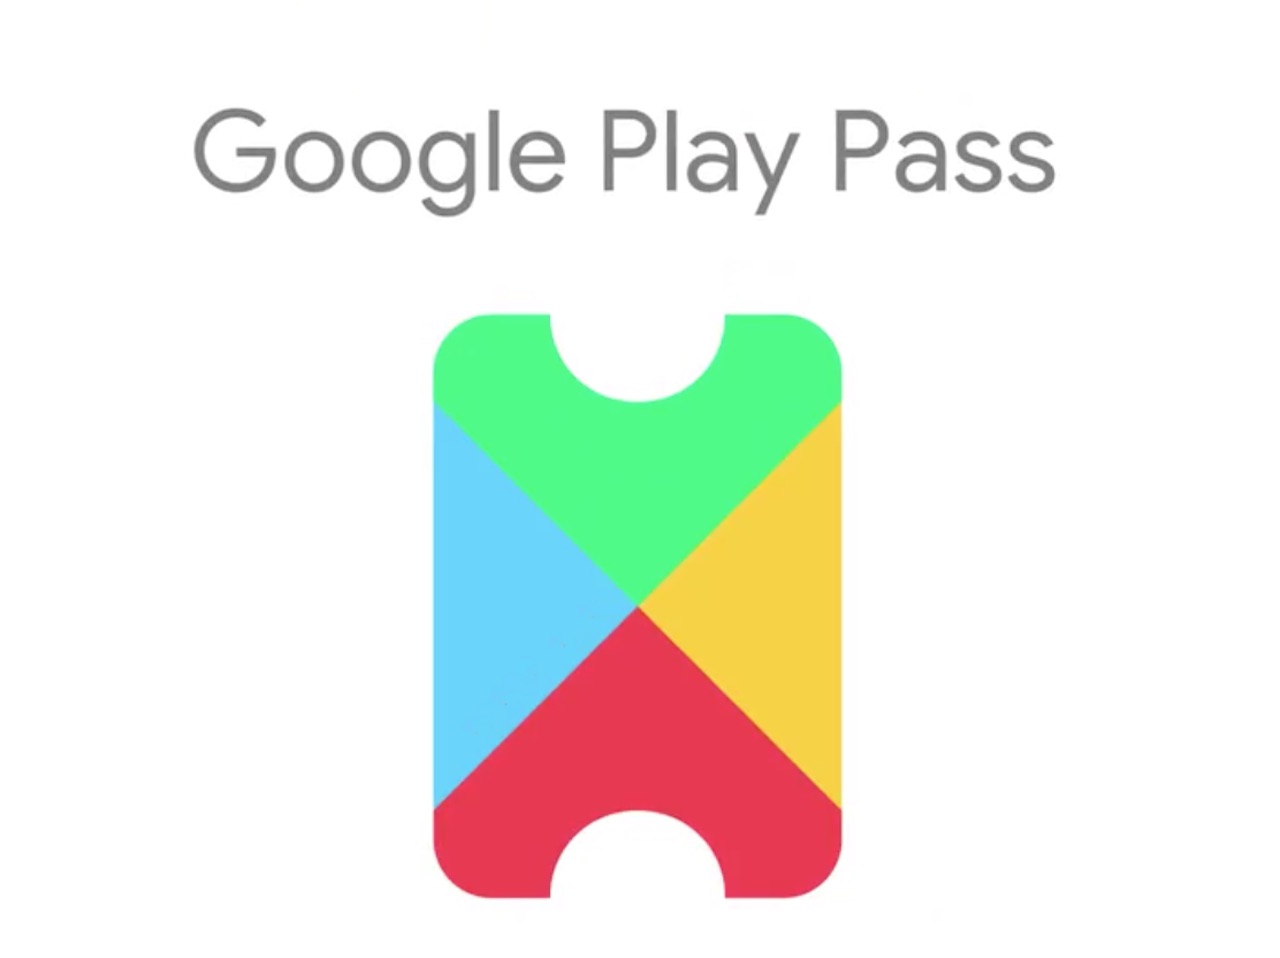 Google Play Pass trial period extended to 30 days Android Community